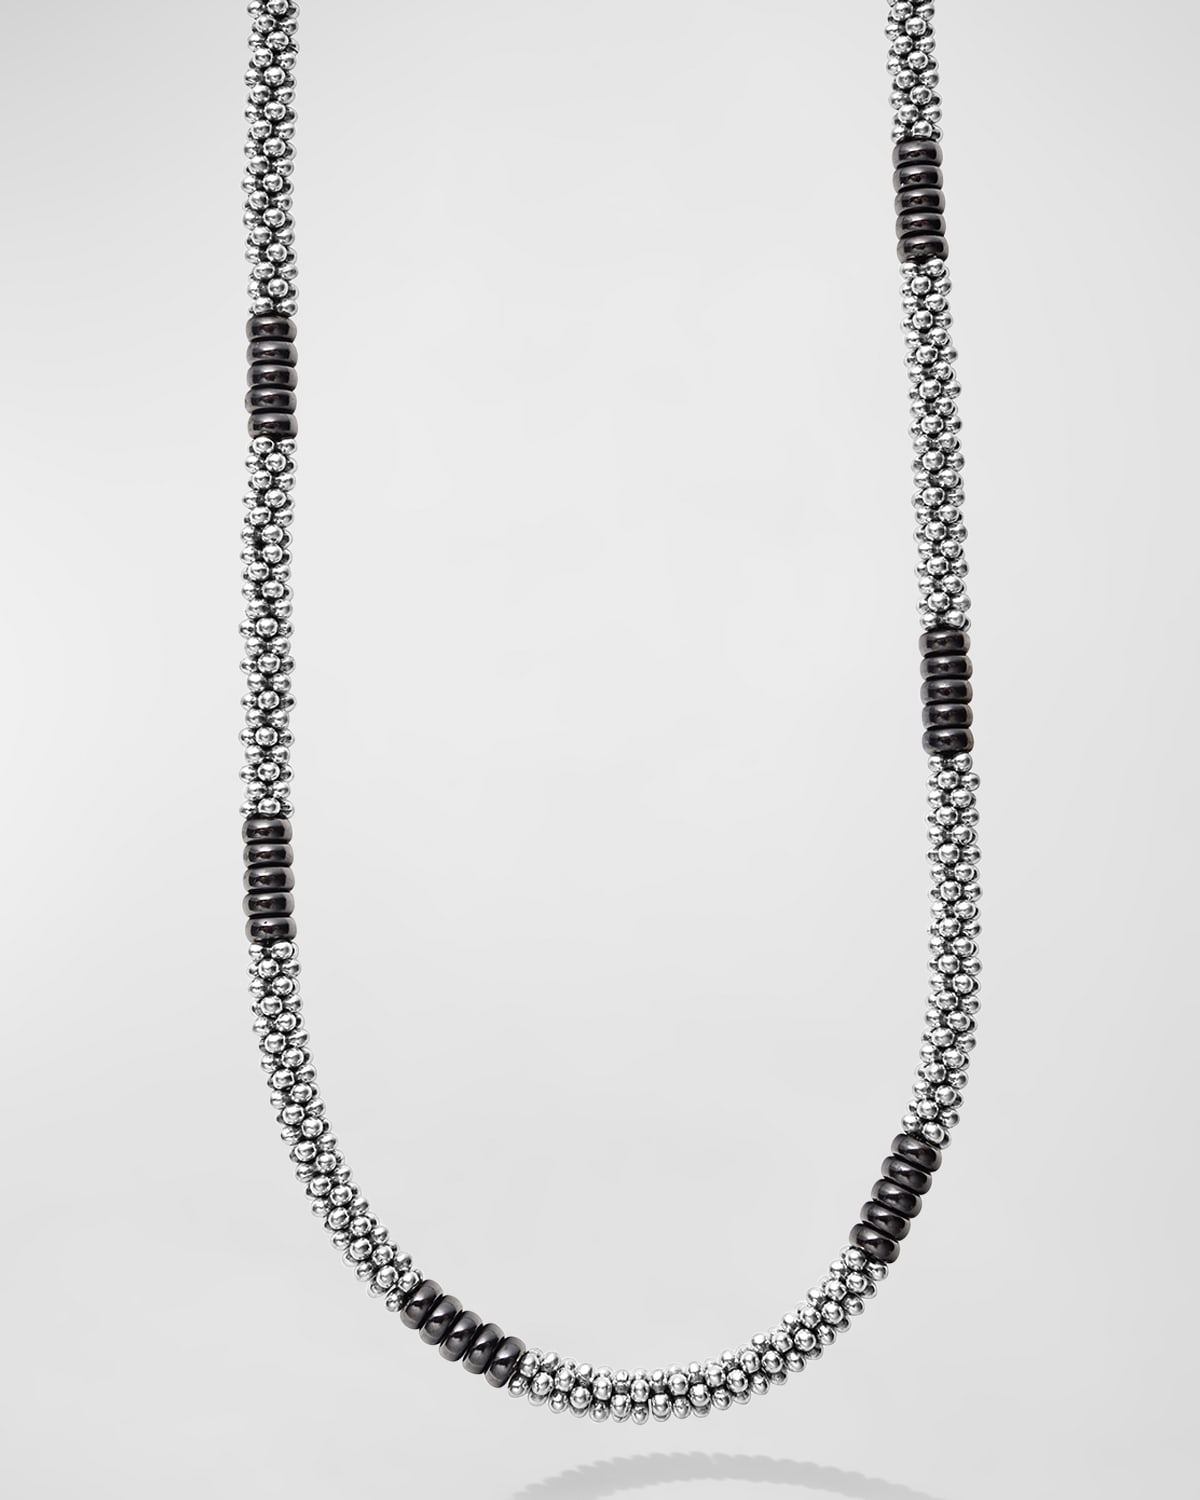 LAGOS STERLING SILVER BLACK CAVIAR BEADED NECKLACE